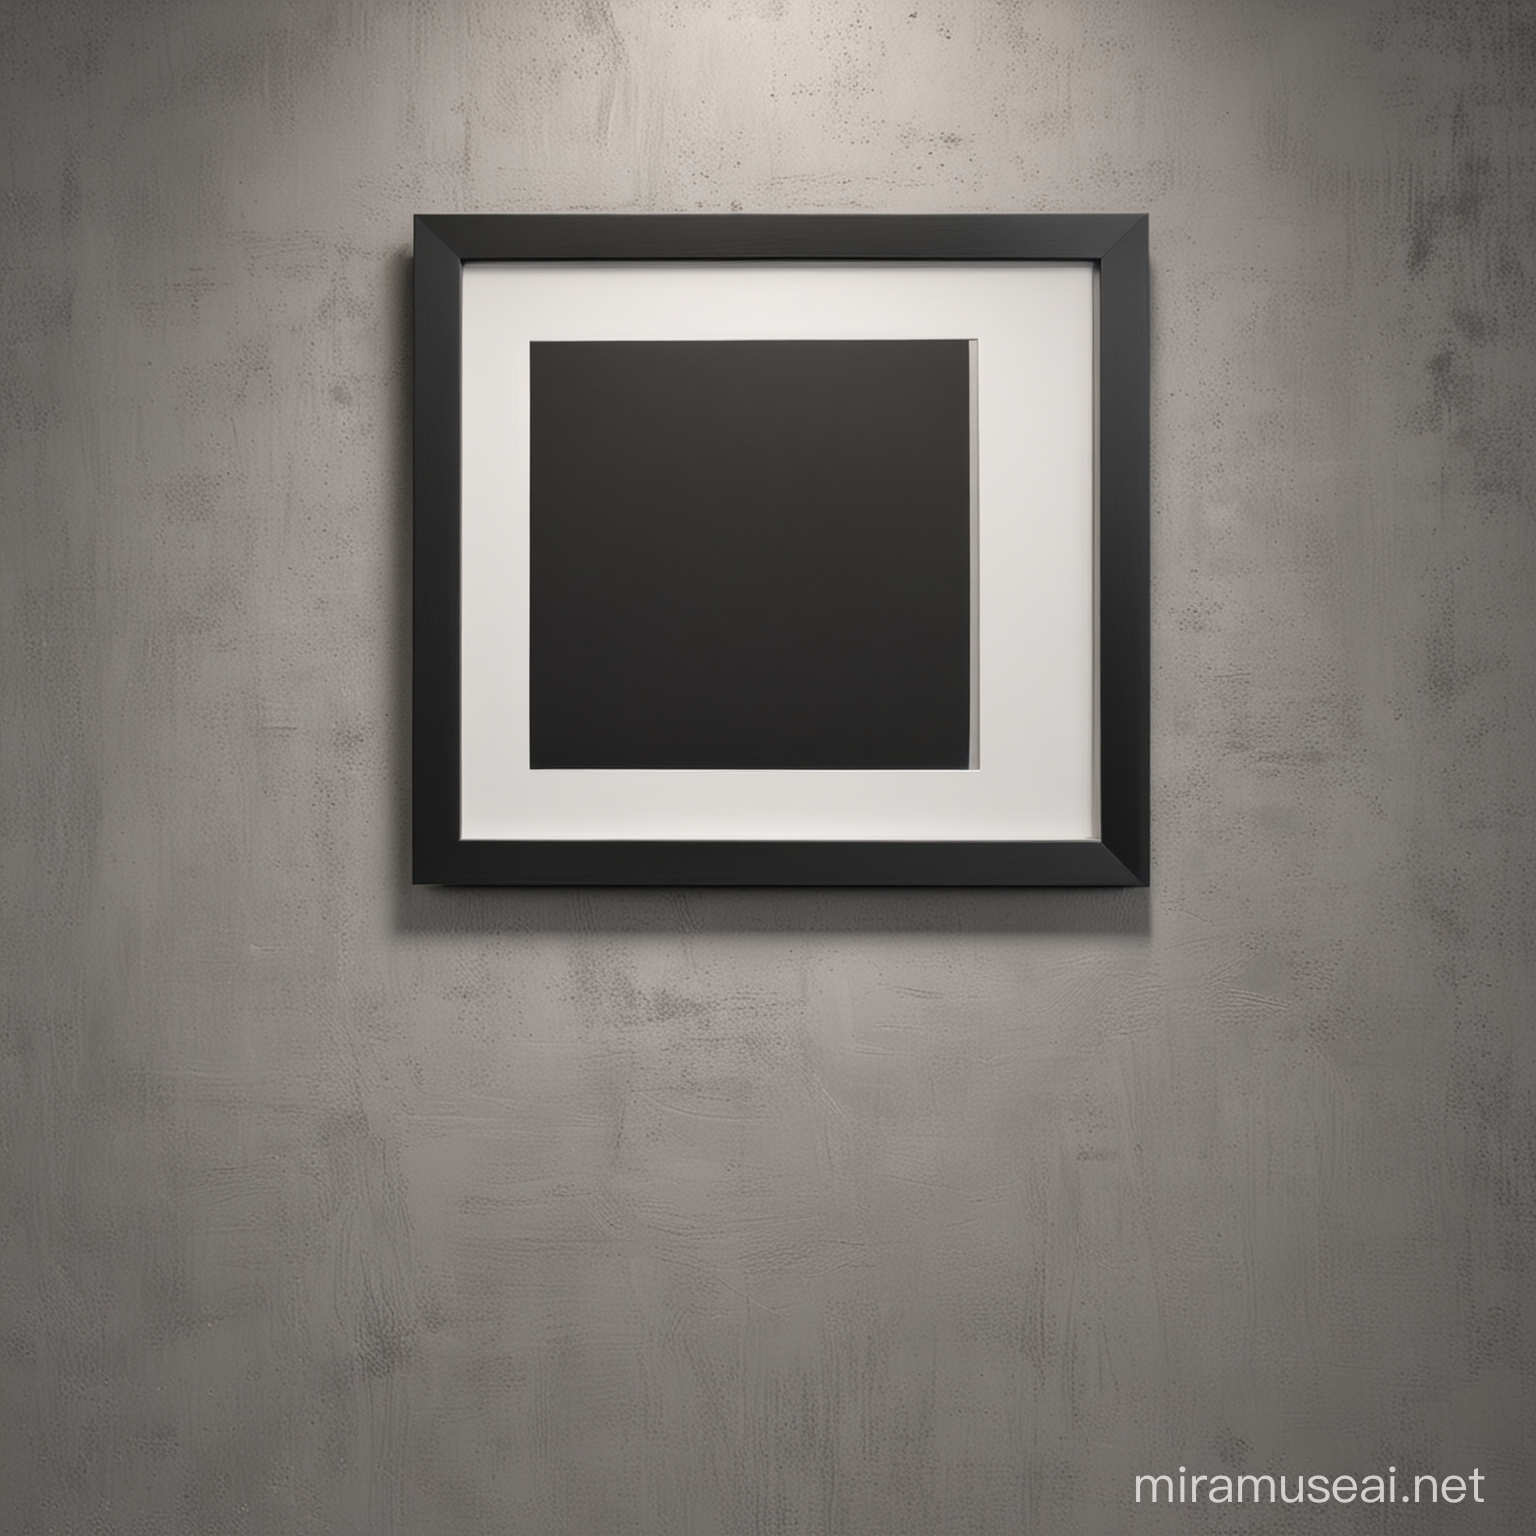 Minimalist Square Picture Frame on Modern Wall